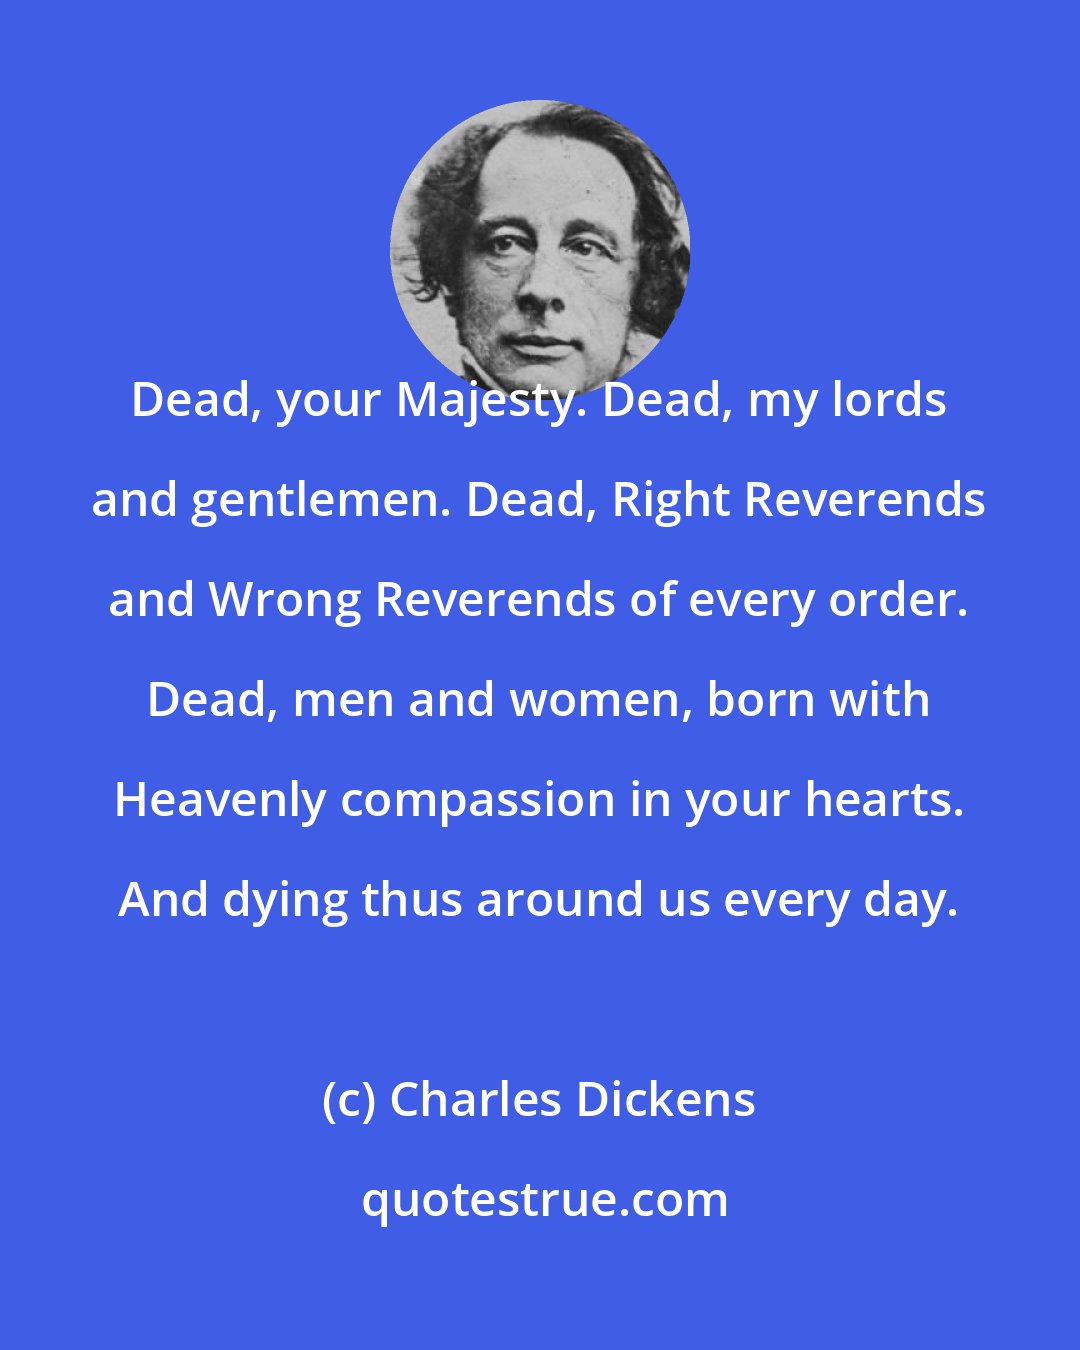 Charles Dickens: Dead, your Majesty. Dead, my lords and gentlemen. Dead, Right Reverends and Wrong Reverends of every order. Dead, men and women, born with Heavenly compassion in your hearts. And dying thus around us every day.